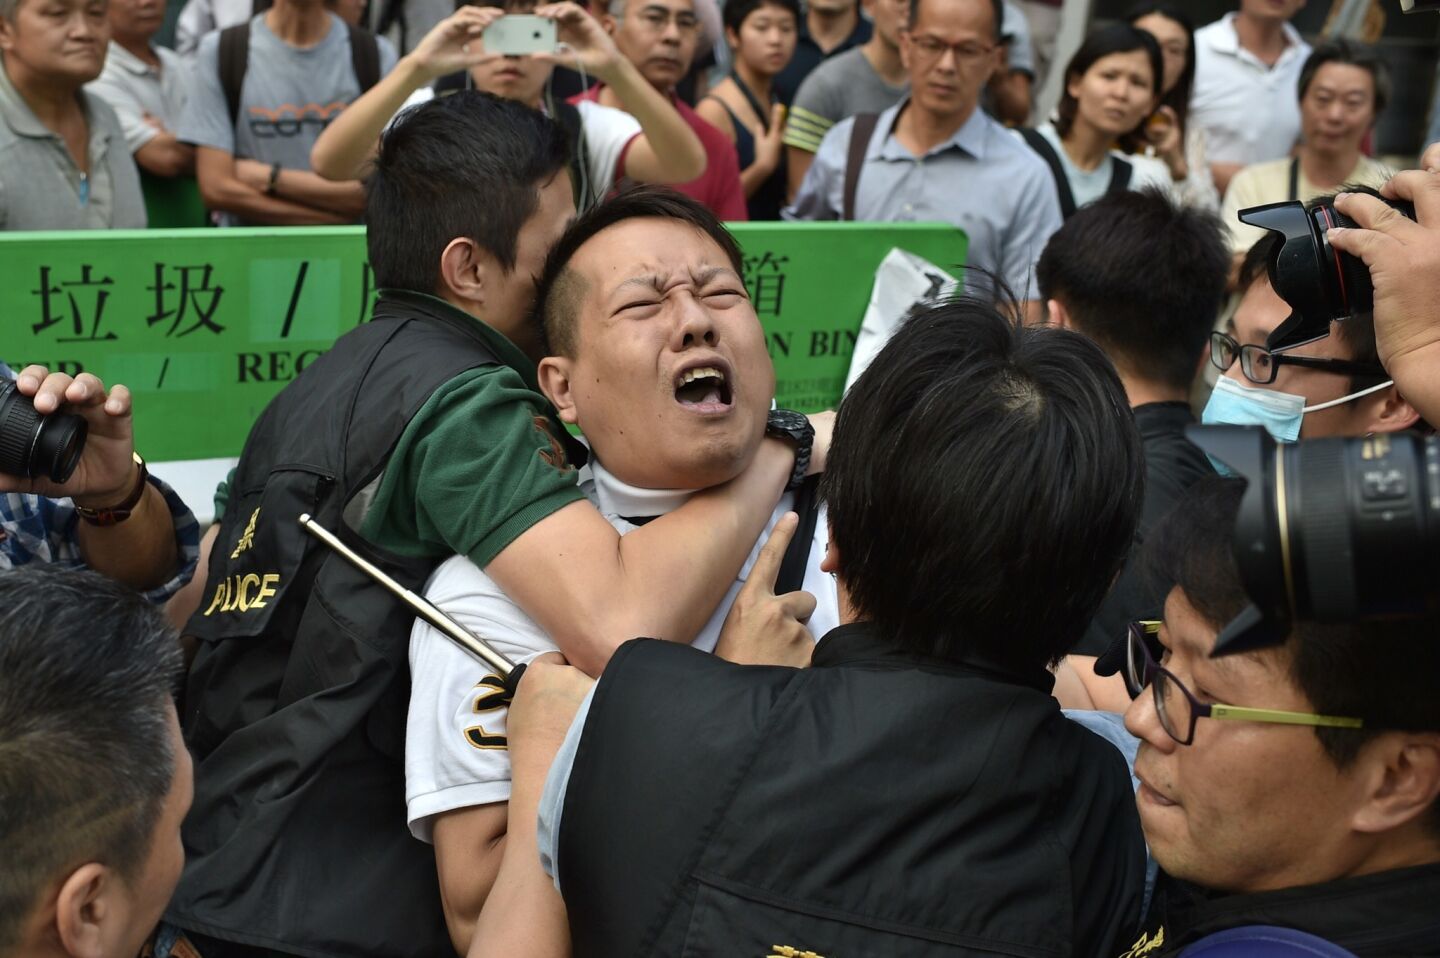 Police officers arrest a protester in the Admiralty district of Hong Kong. Dozens of masked men rushed barricades at Hong Kong's main pro-democracy site, triggering clashes as demonstrators tried to push them back and police struggled to contain the chaos.